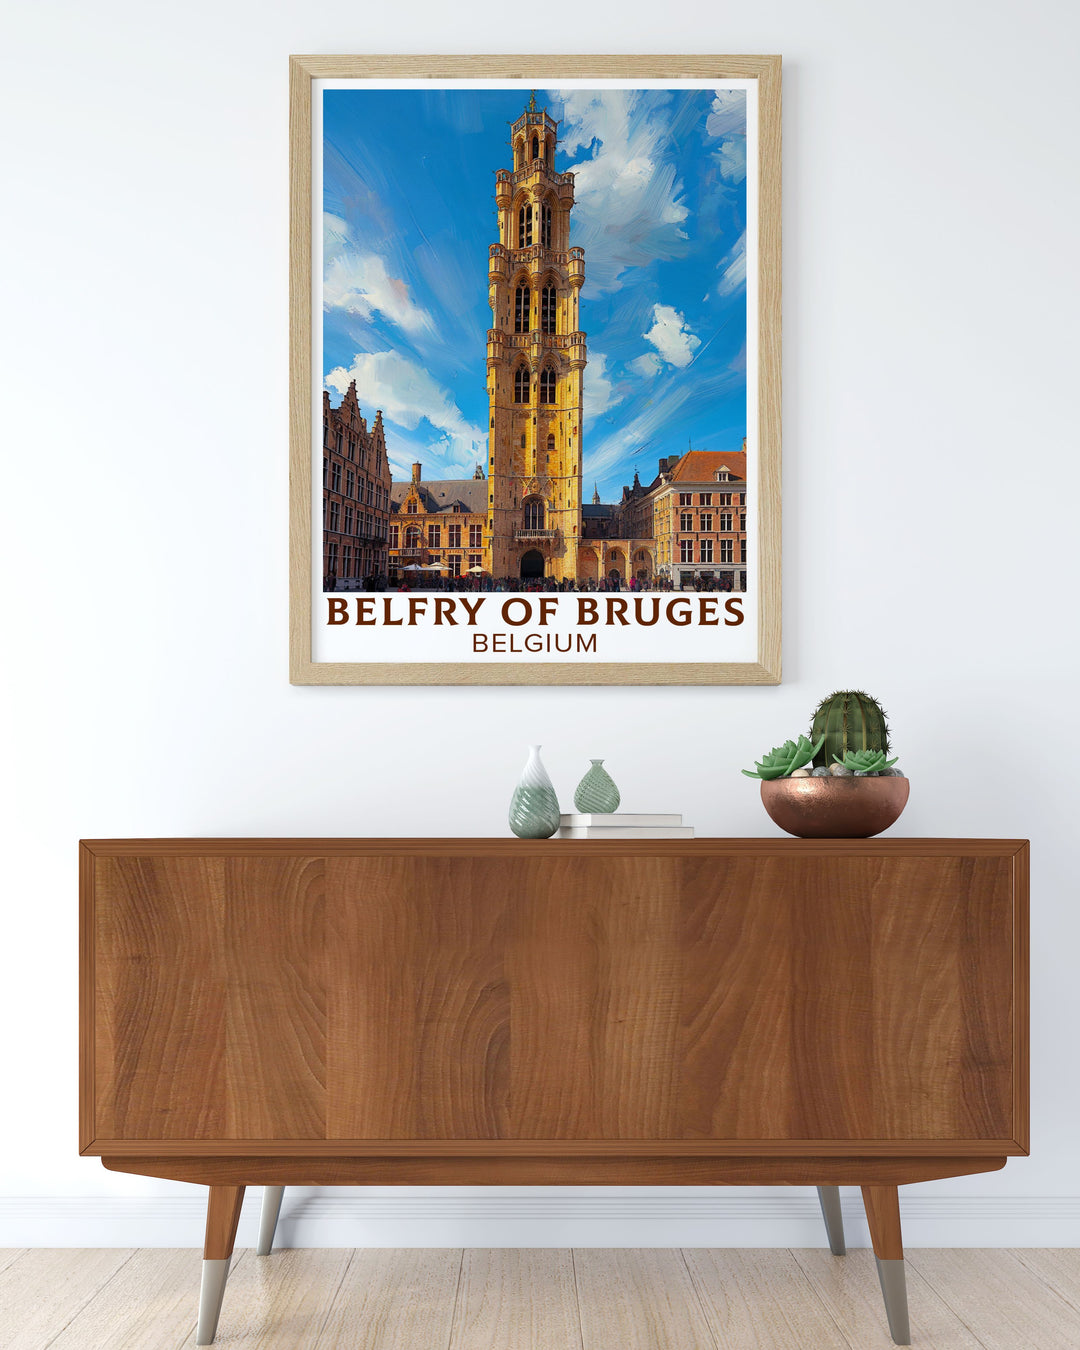 Captivating Belgium travel print depicting the Belfry of Bruges. This artwork brings the essence of Bruges to life with its detailed depiction of the citys iconic tower and historic charm, perfect for home decor or a thoughtful gift.